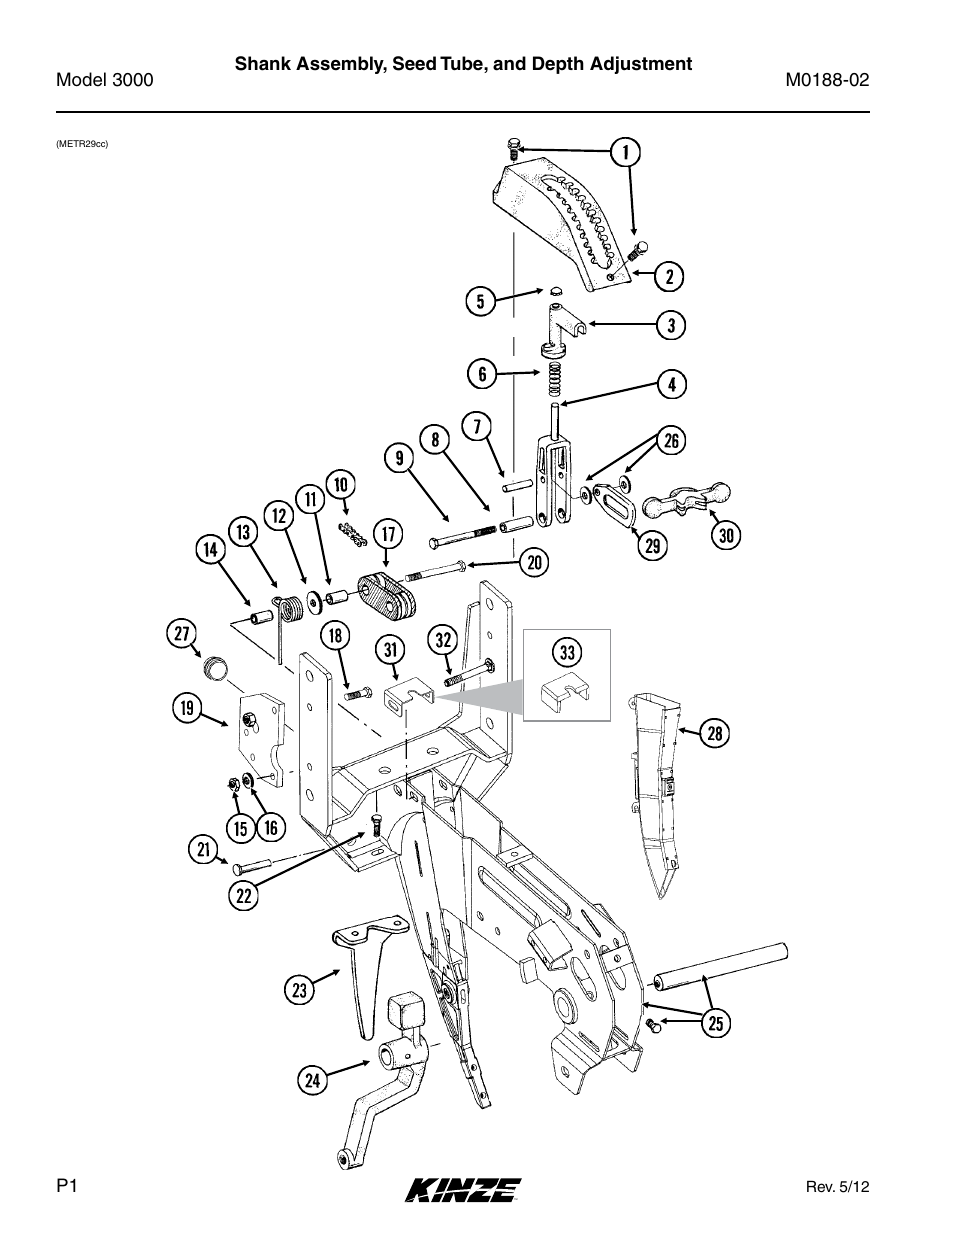 Row unit, Shank assembly, seed tube, and depth adjustment | Kinze 3000 Rigid Frame Planter Rev. 5/14 User Manual | Page 4 / 154